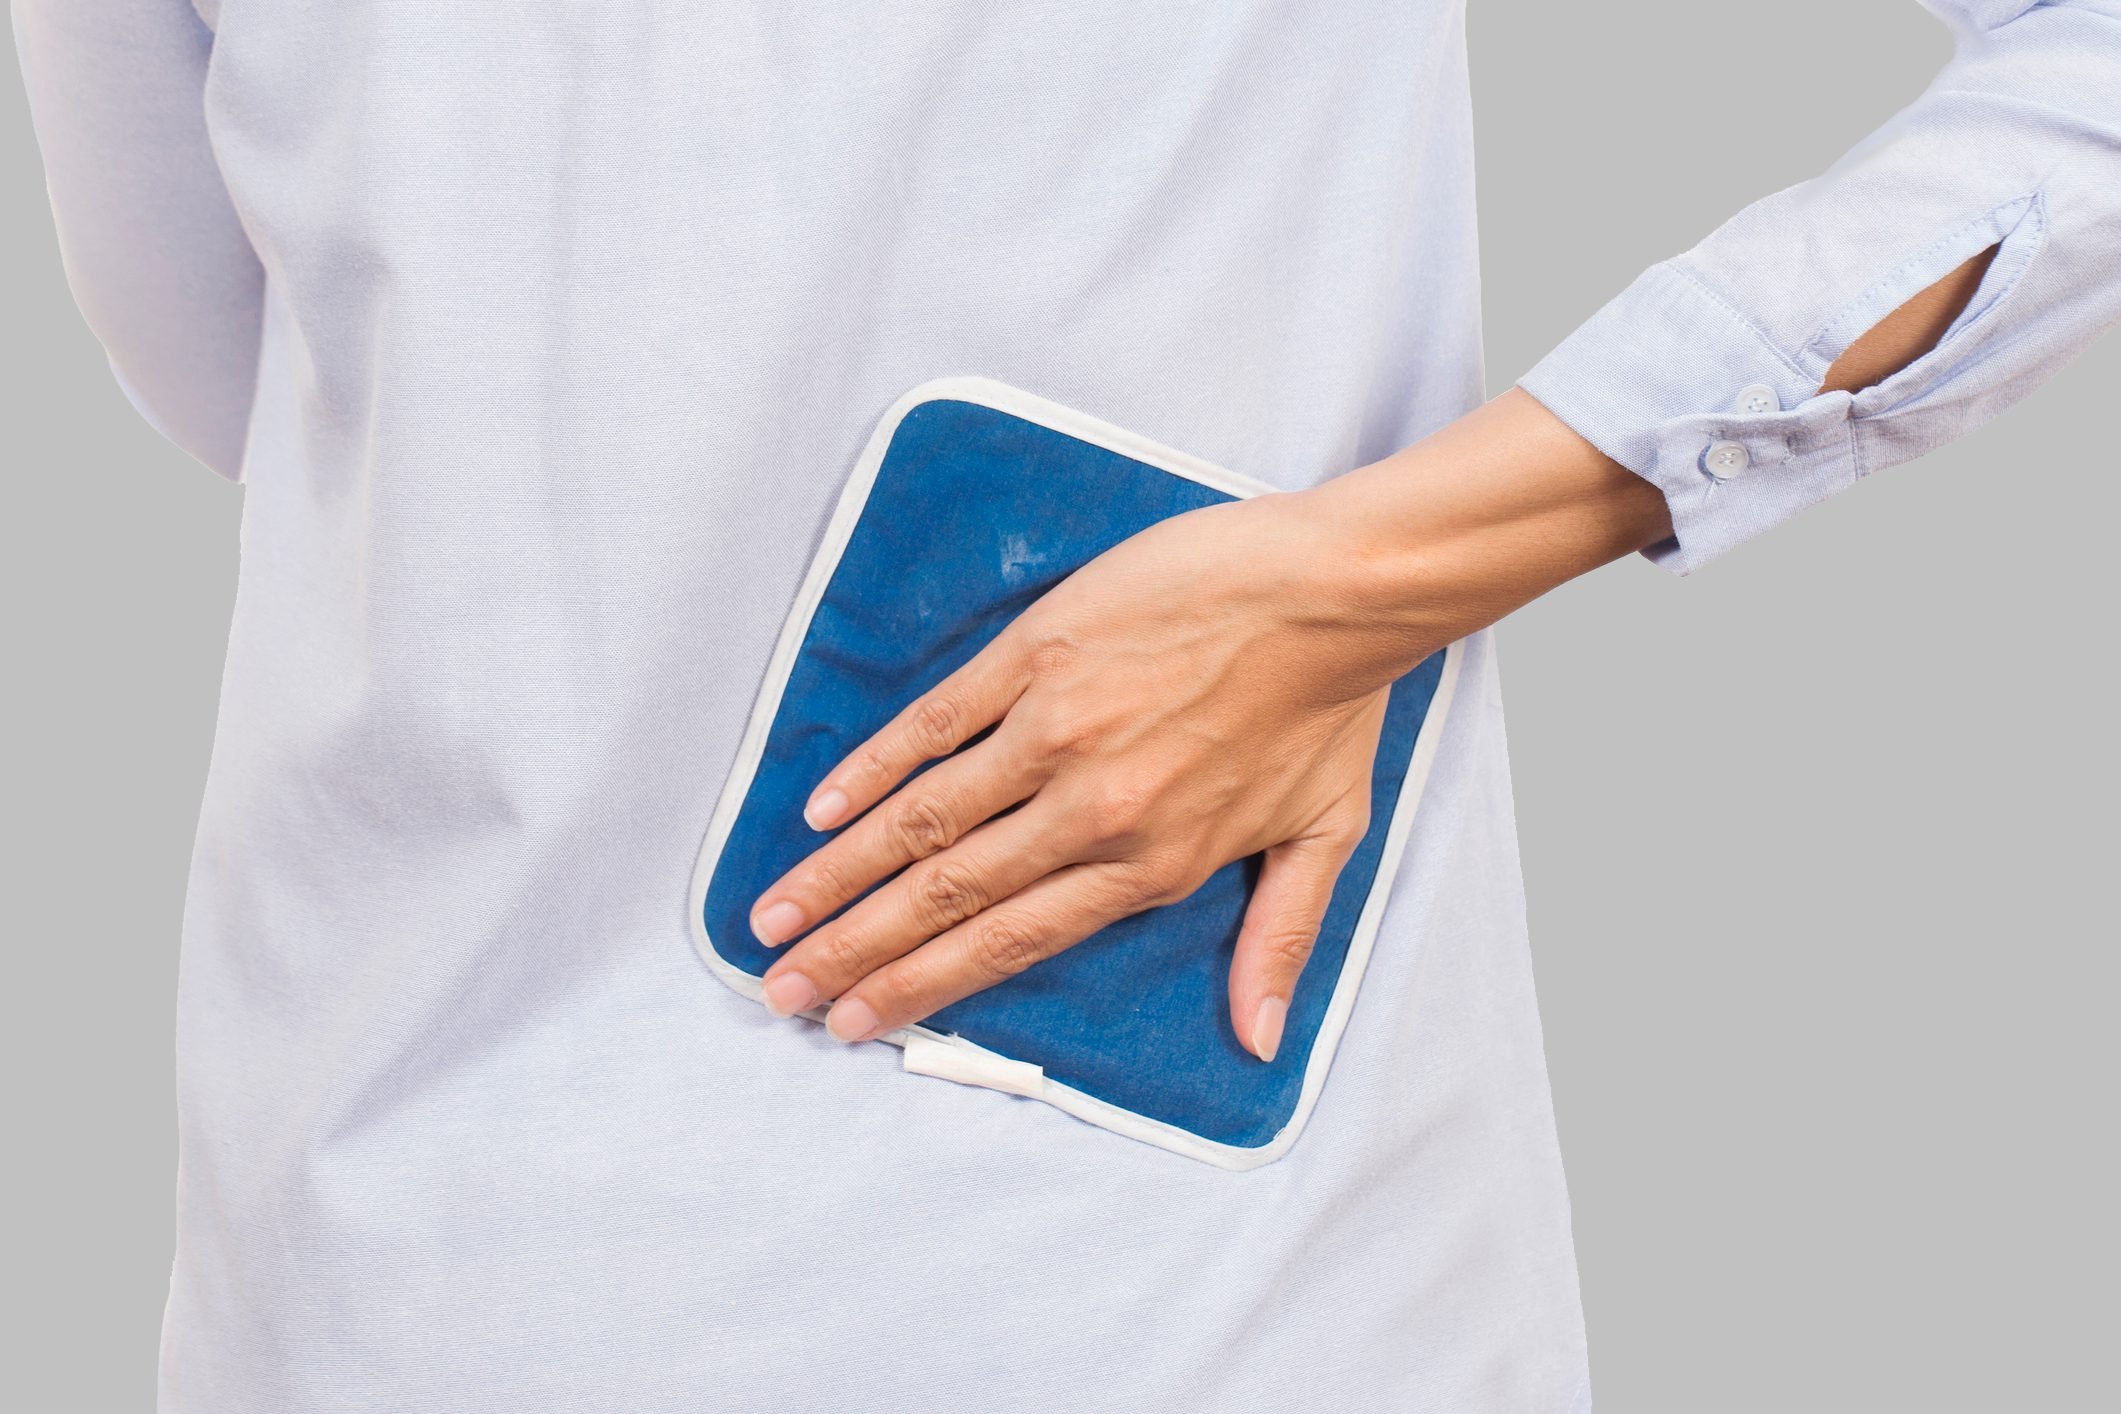 Should You Use Ice or Heat for Back Pain? What Experts Say